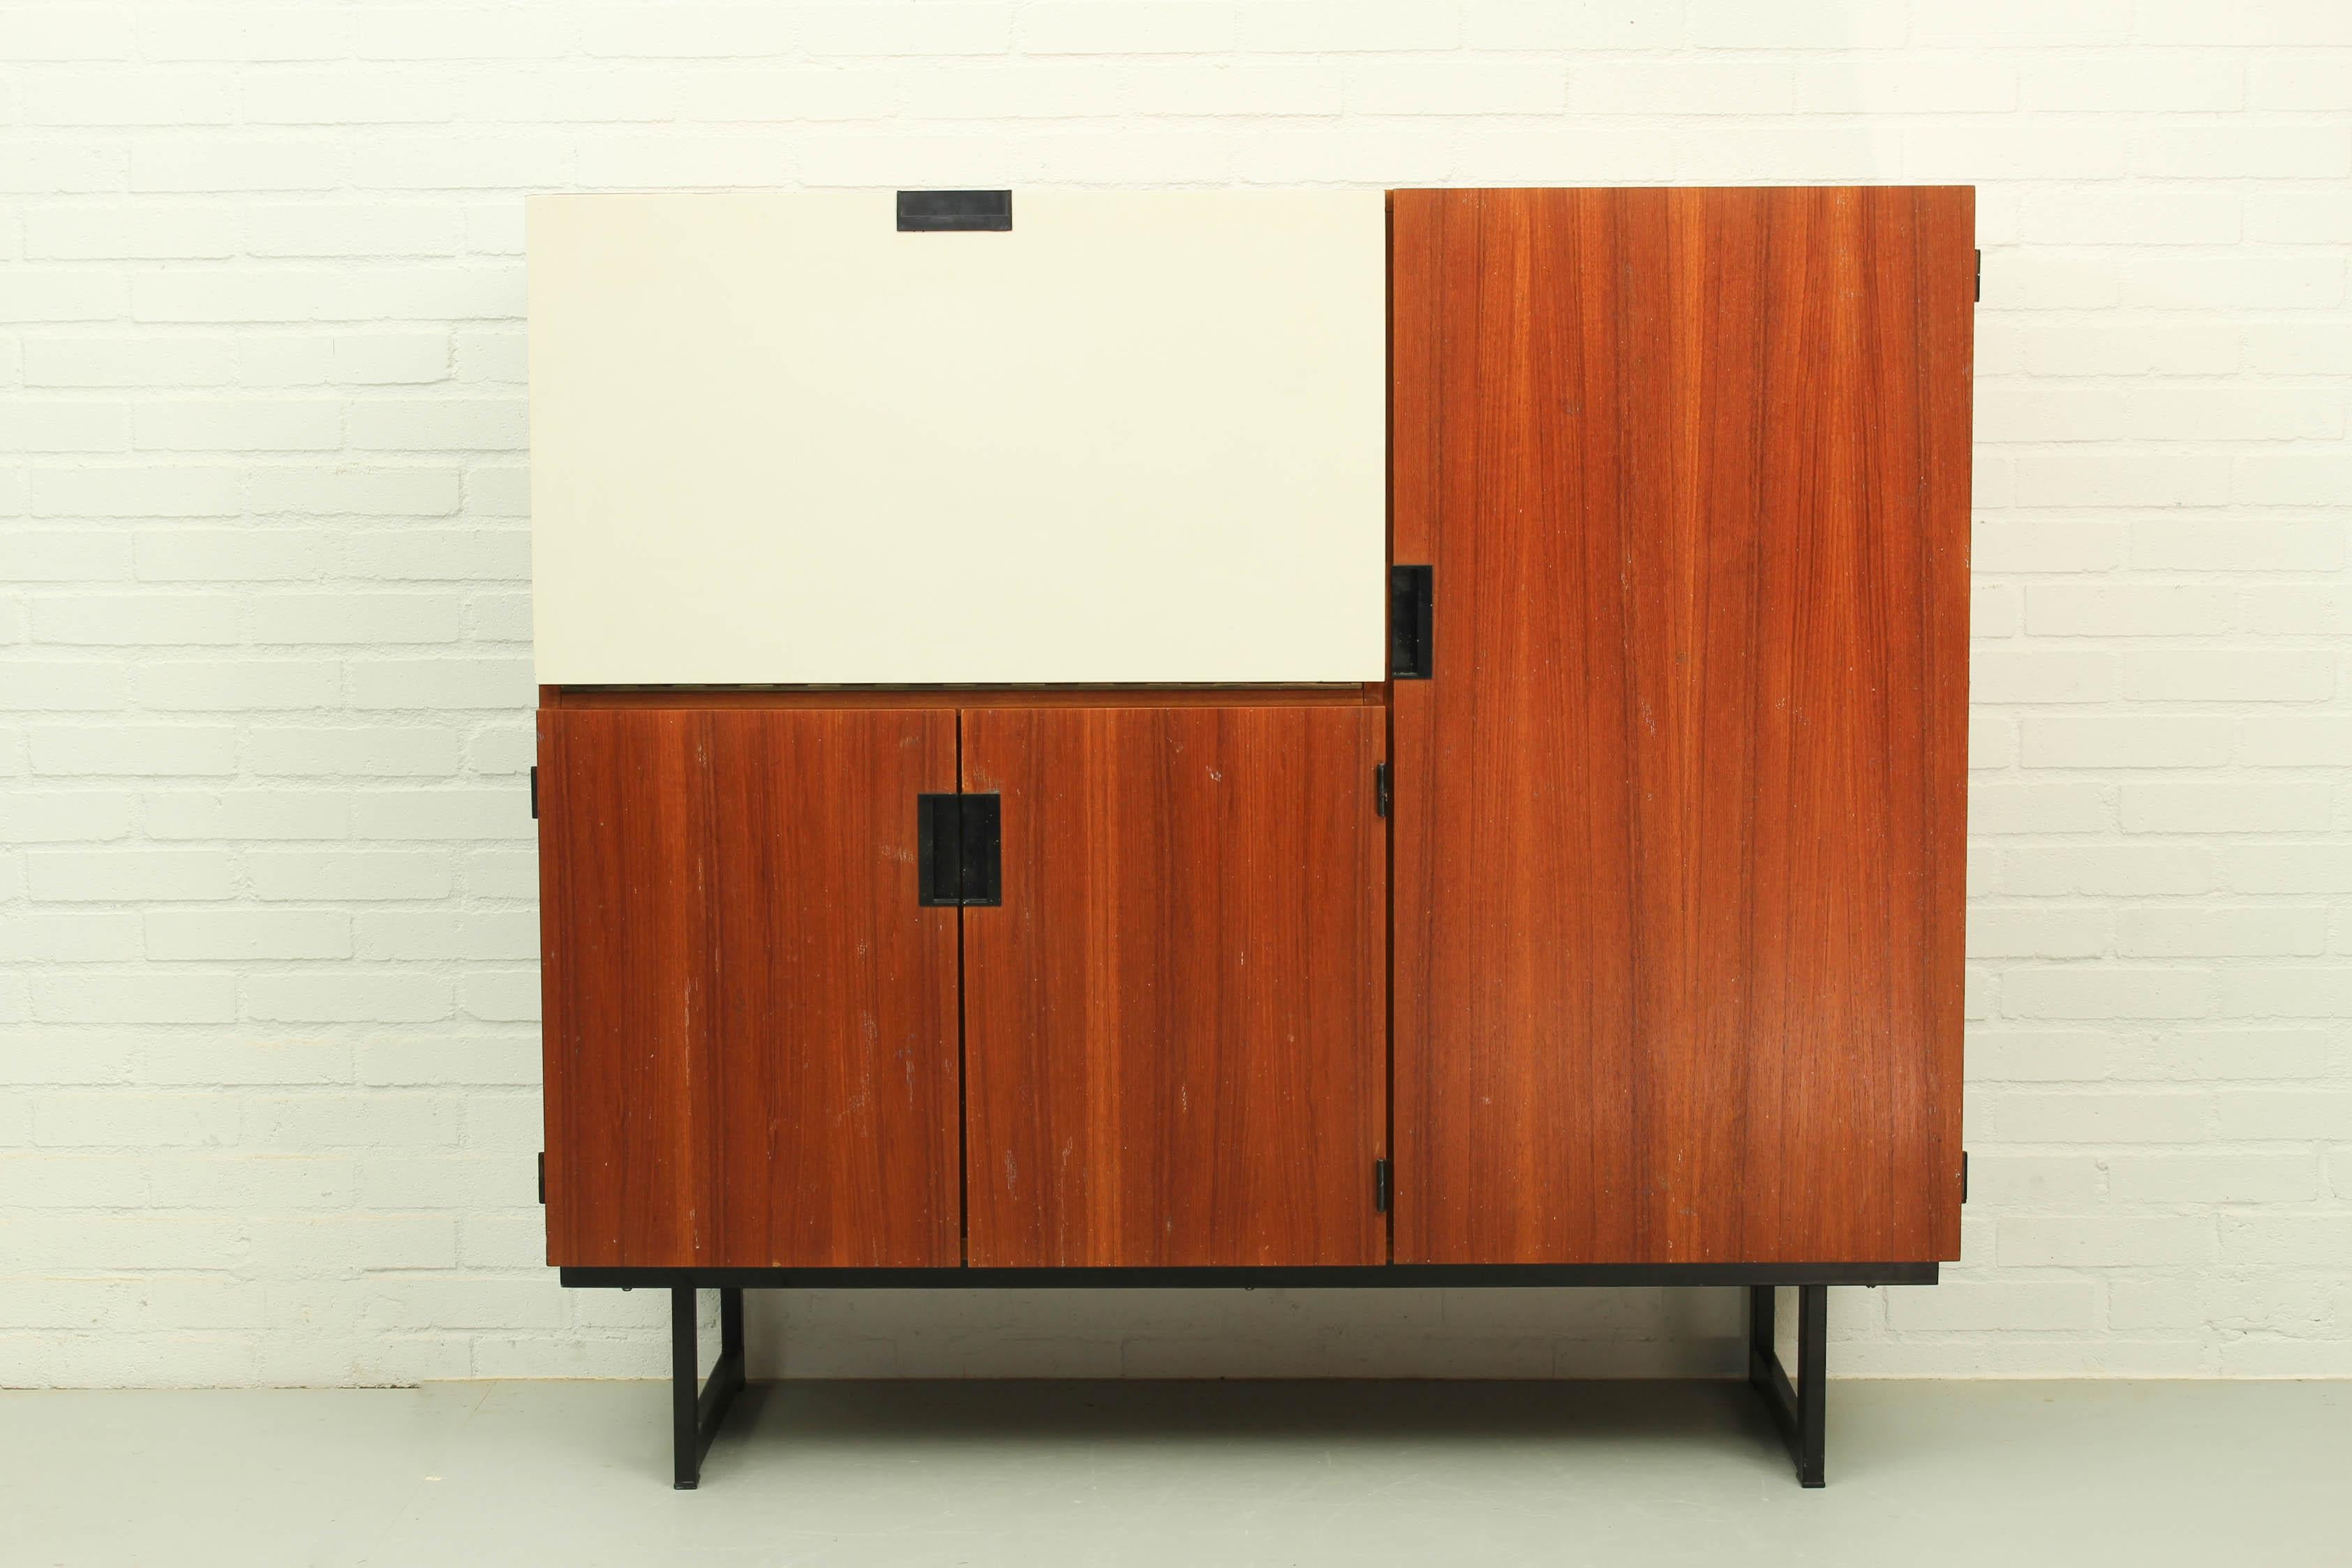 Dutch vintage design cabinet CU01 designed by Cees Braakman for Pastoe, 1958. This highboard comes from the very popular 'Japanese Series